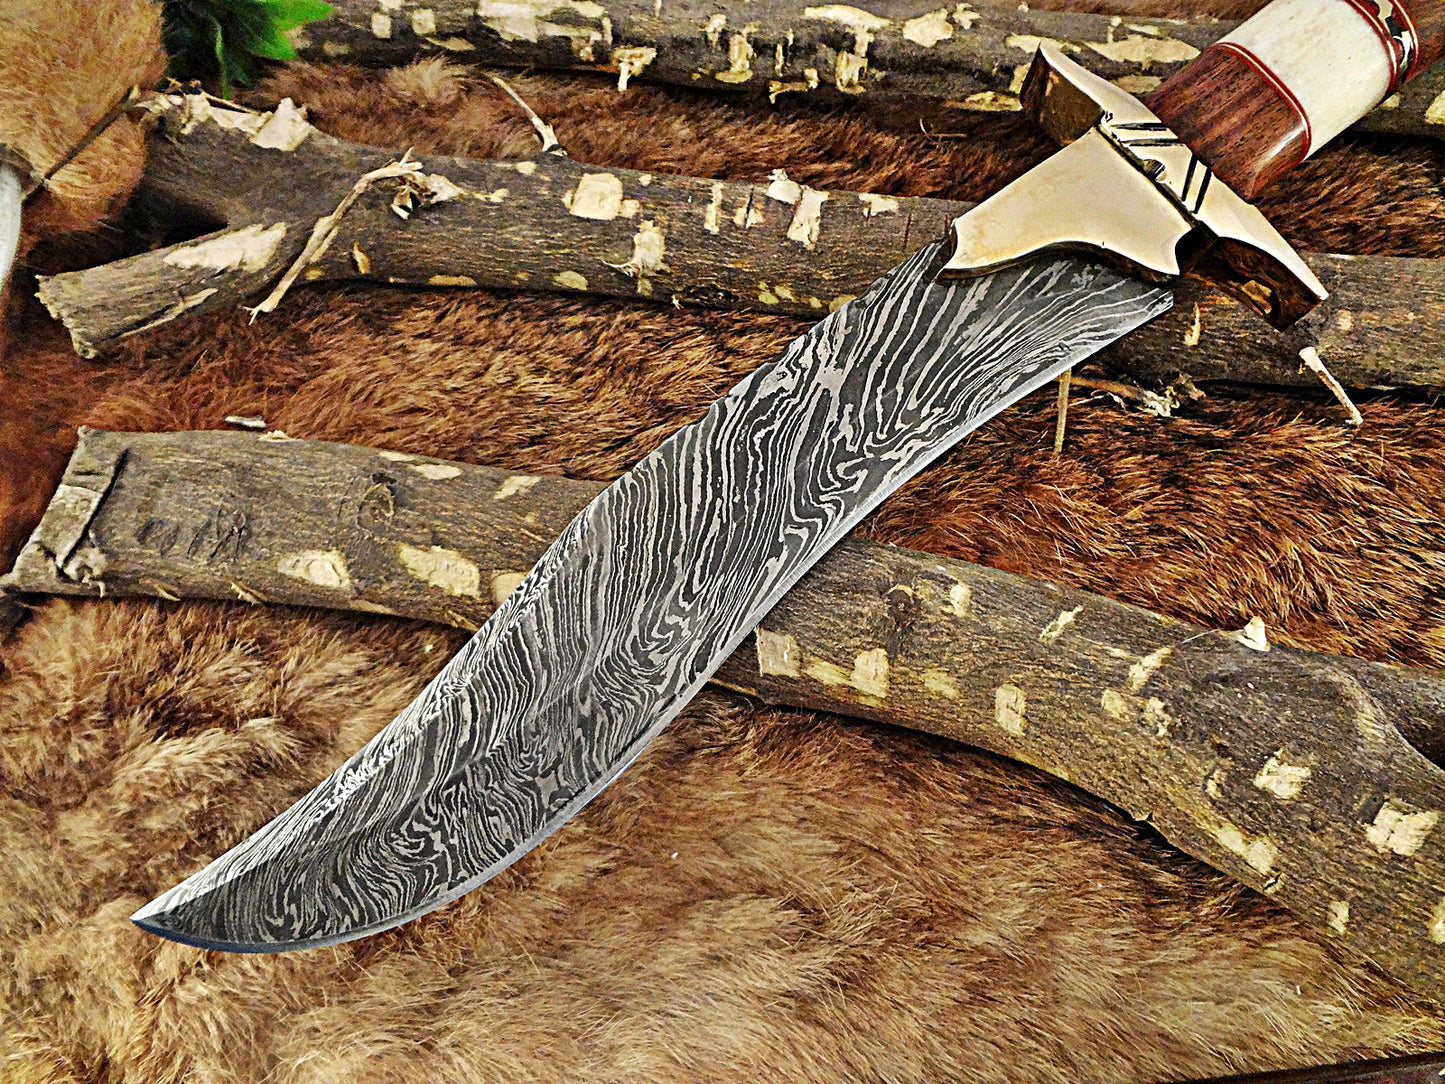 15" Long Hunting Bowie knife, hand forged Damascus steel, Red  Dollar wood with Brass Pommel & Finger guard, Cow Leather sheath